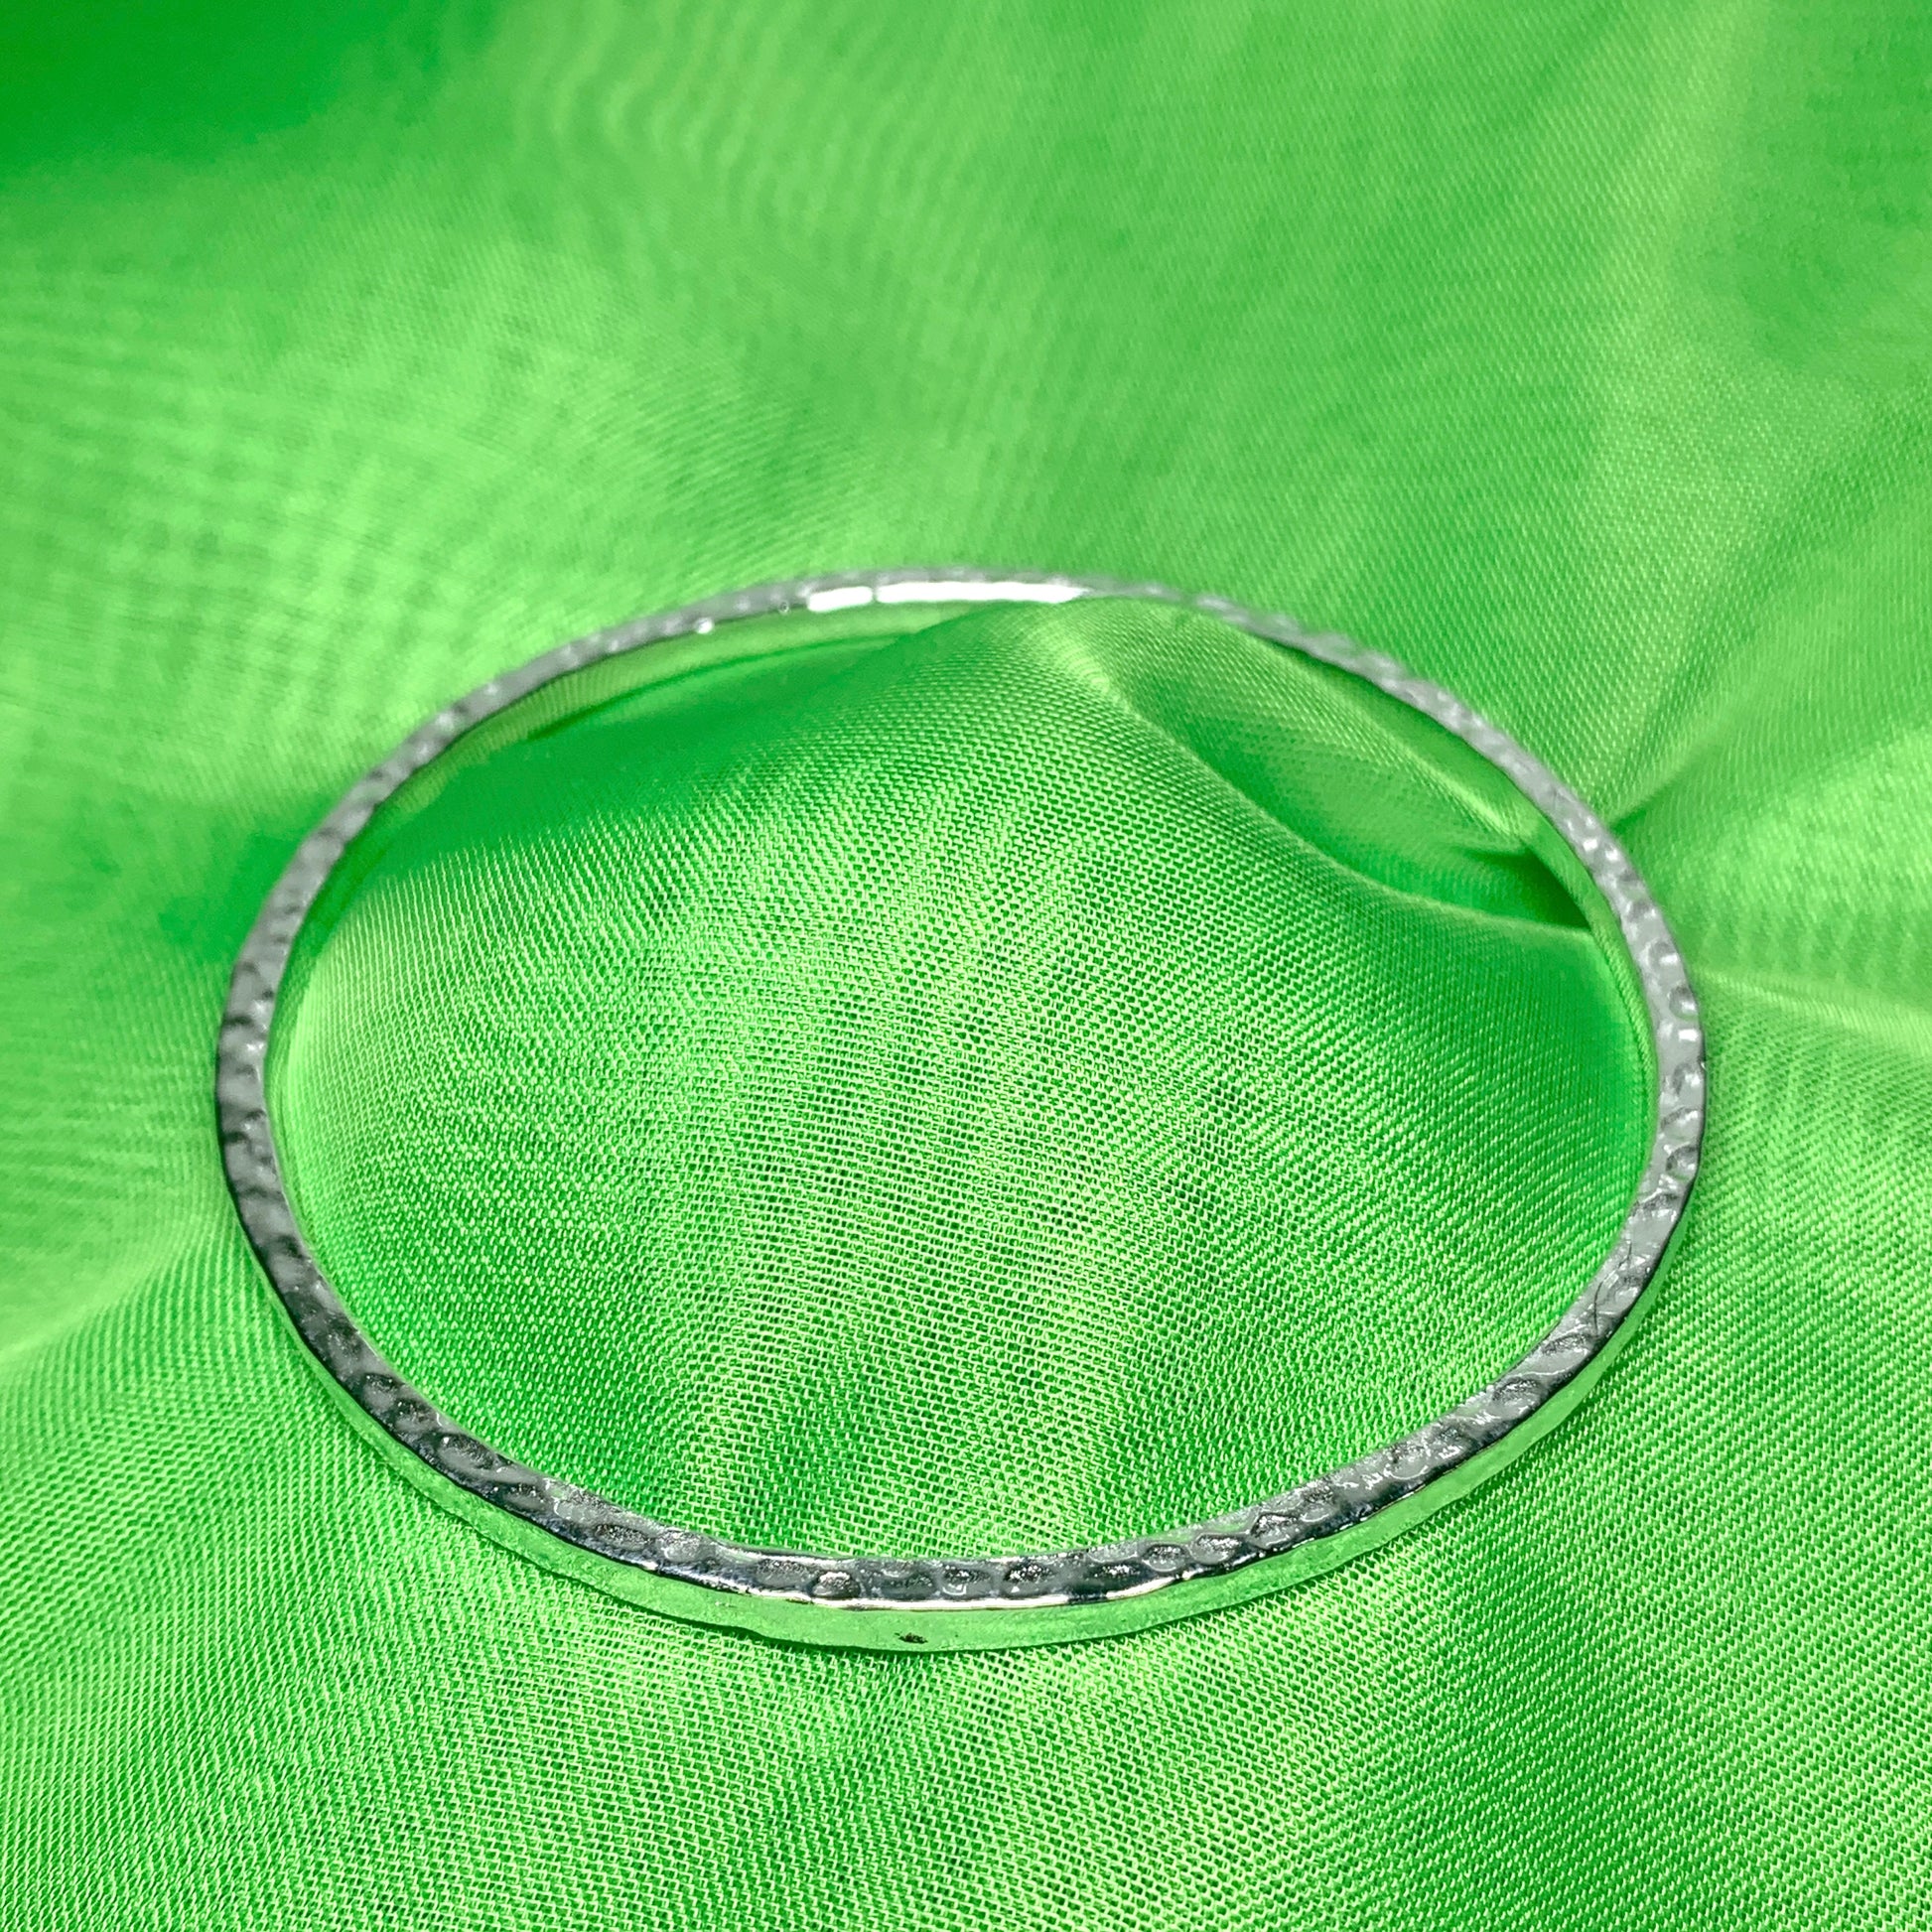 Solid sterling silver hammered heavy bangle